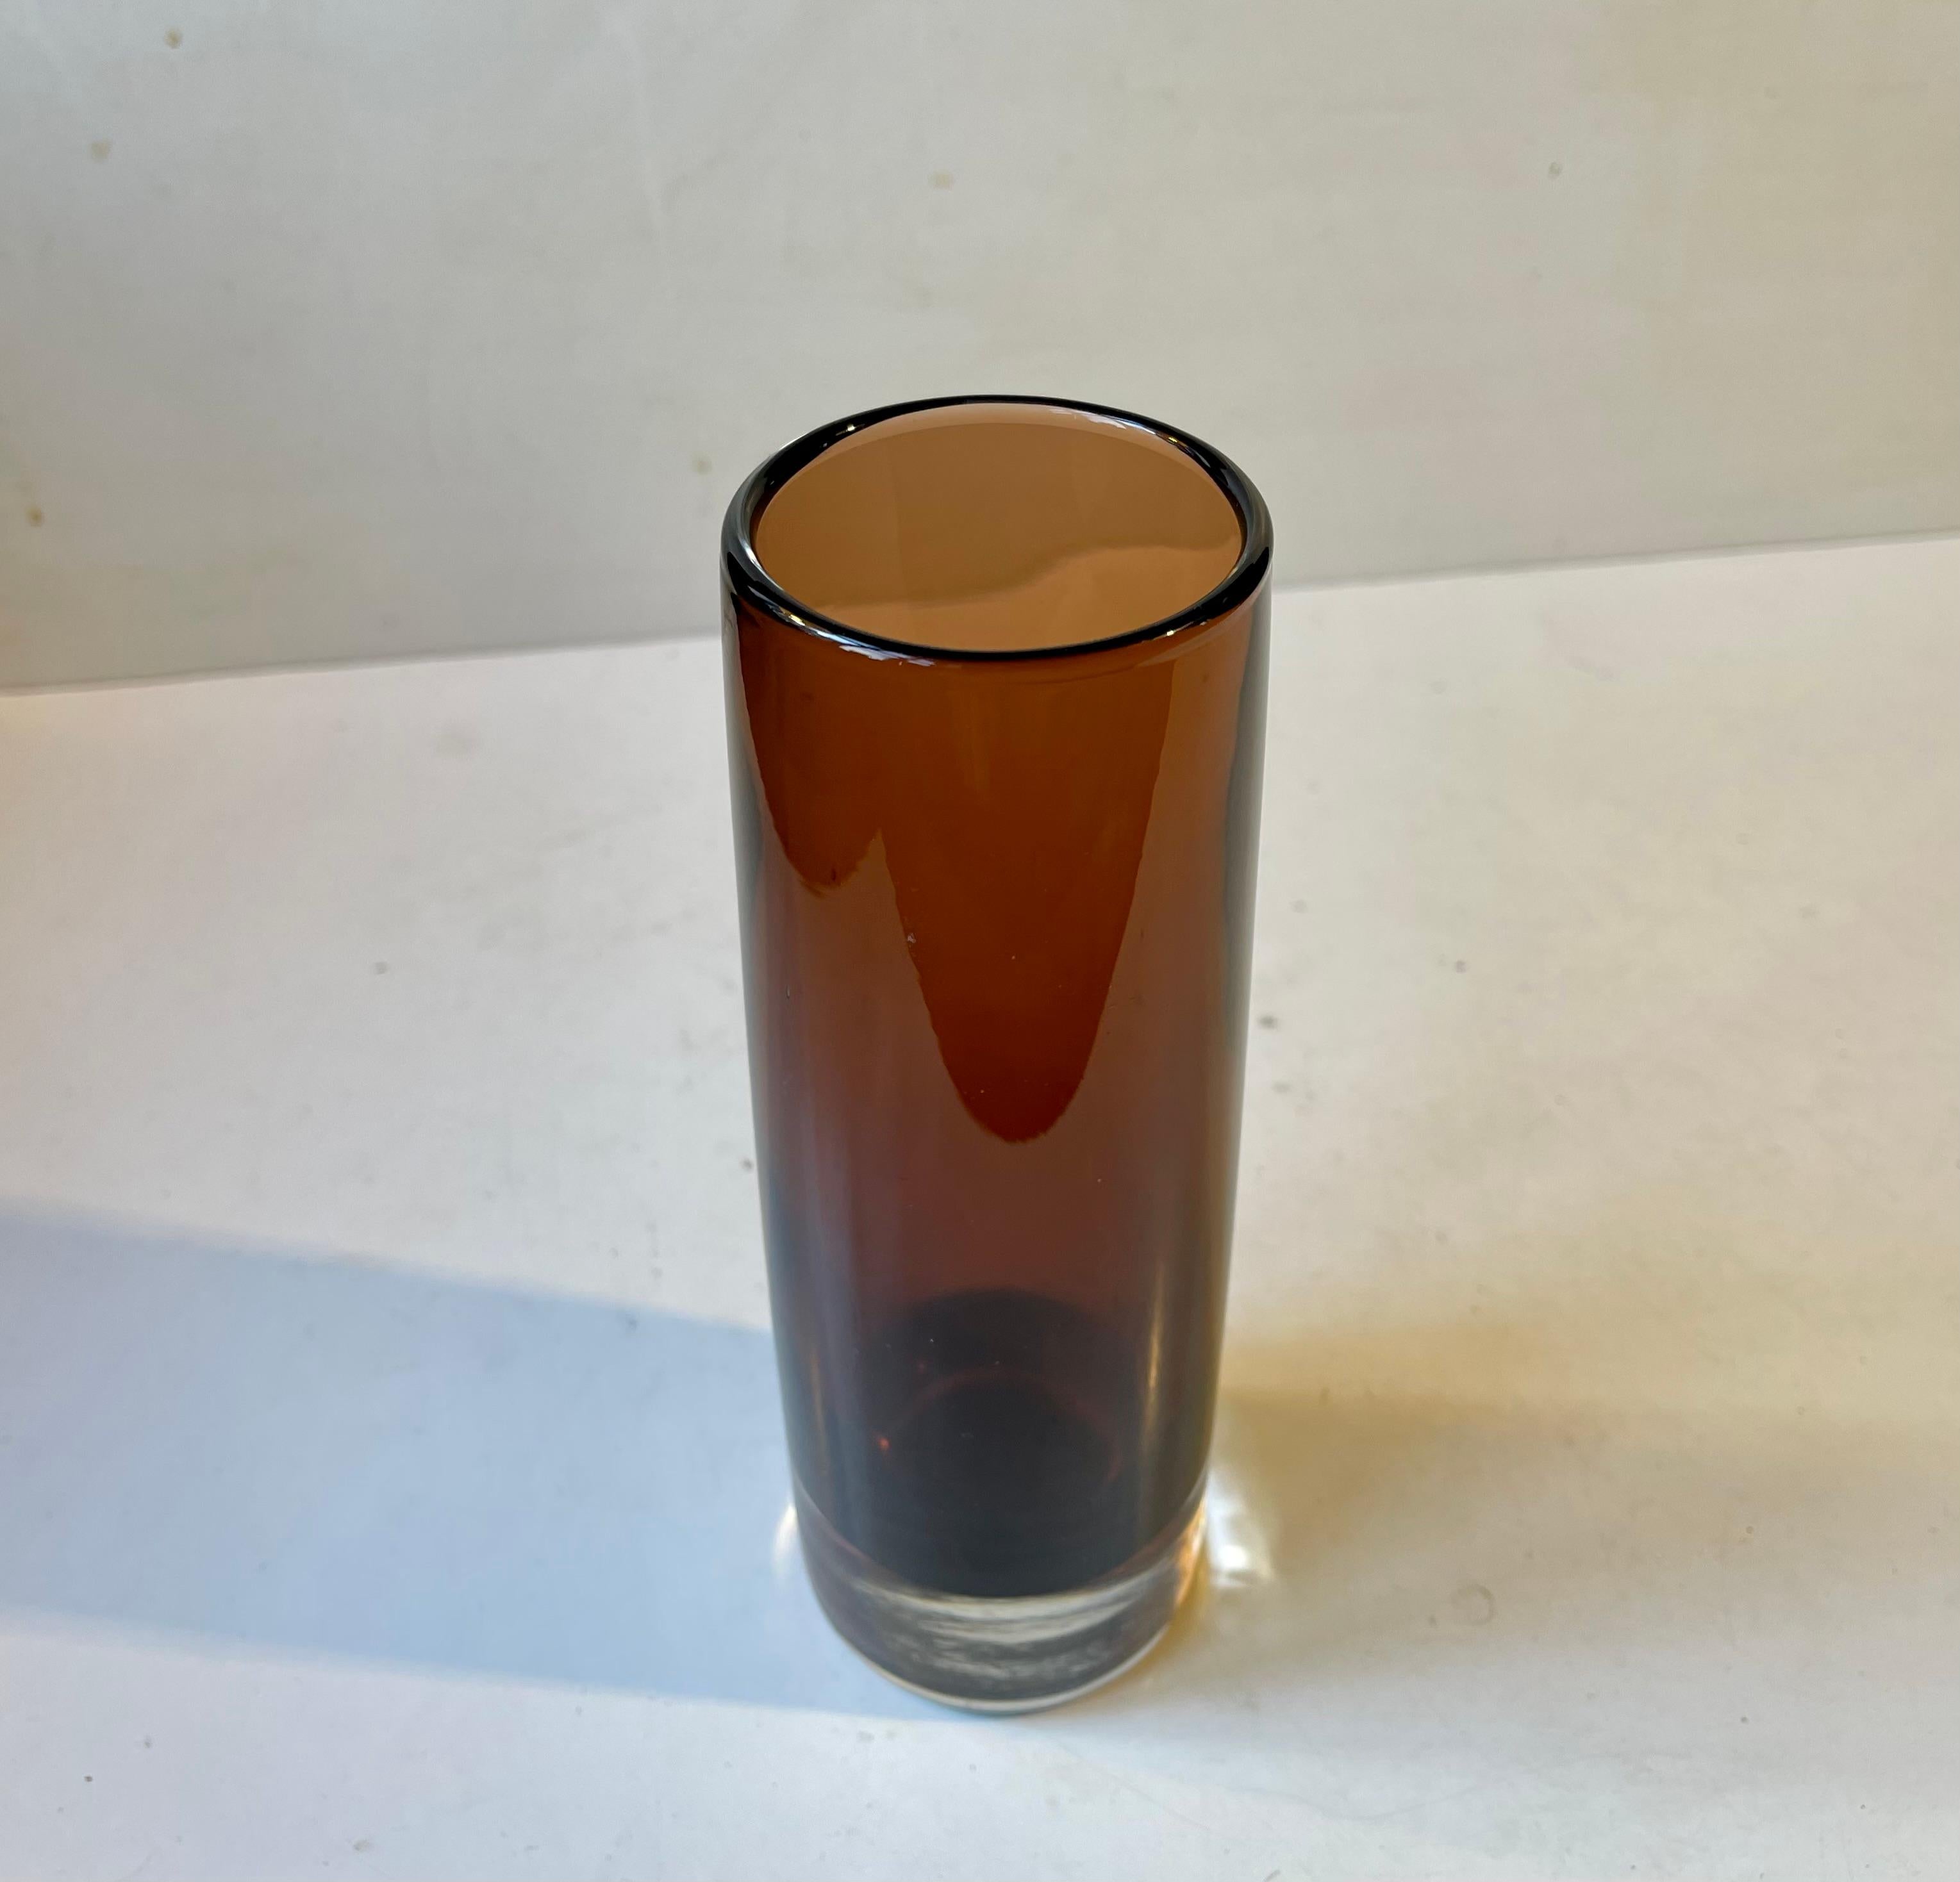 Cylindrical Coffee brown tapering Glass vase attributed to Tamara Aladin. Manufactured by Riihimaen Lasi in Finland circa 1970-75. Measurements: H: 21 cm, Diameter: 6.8 cm.